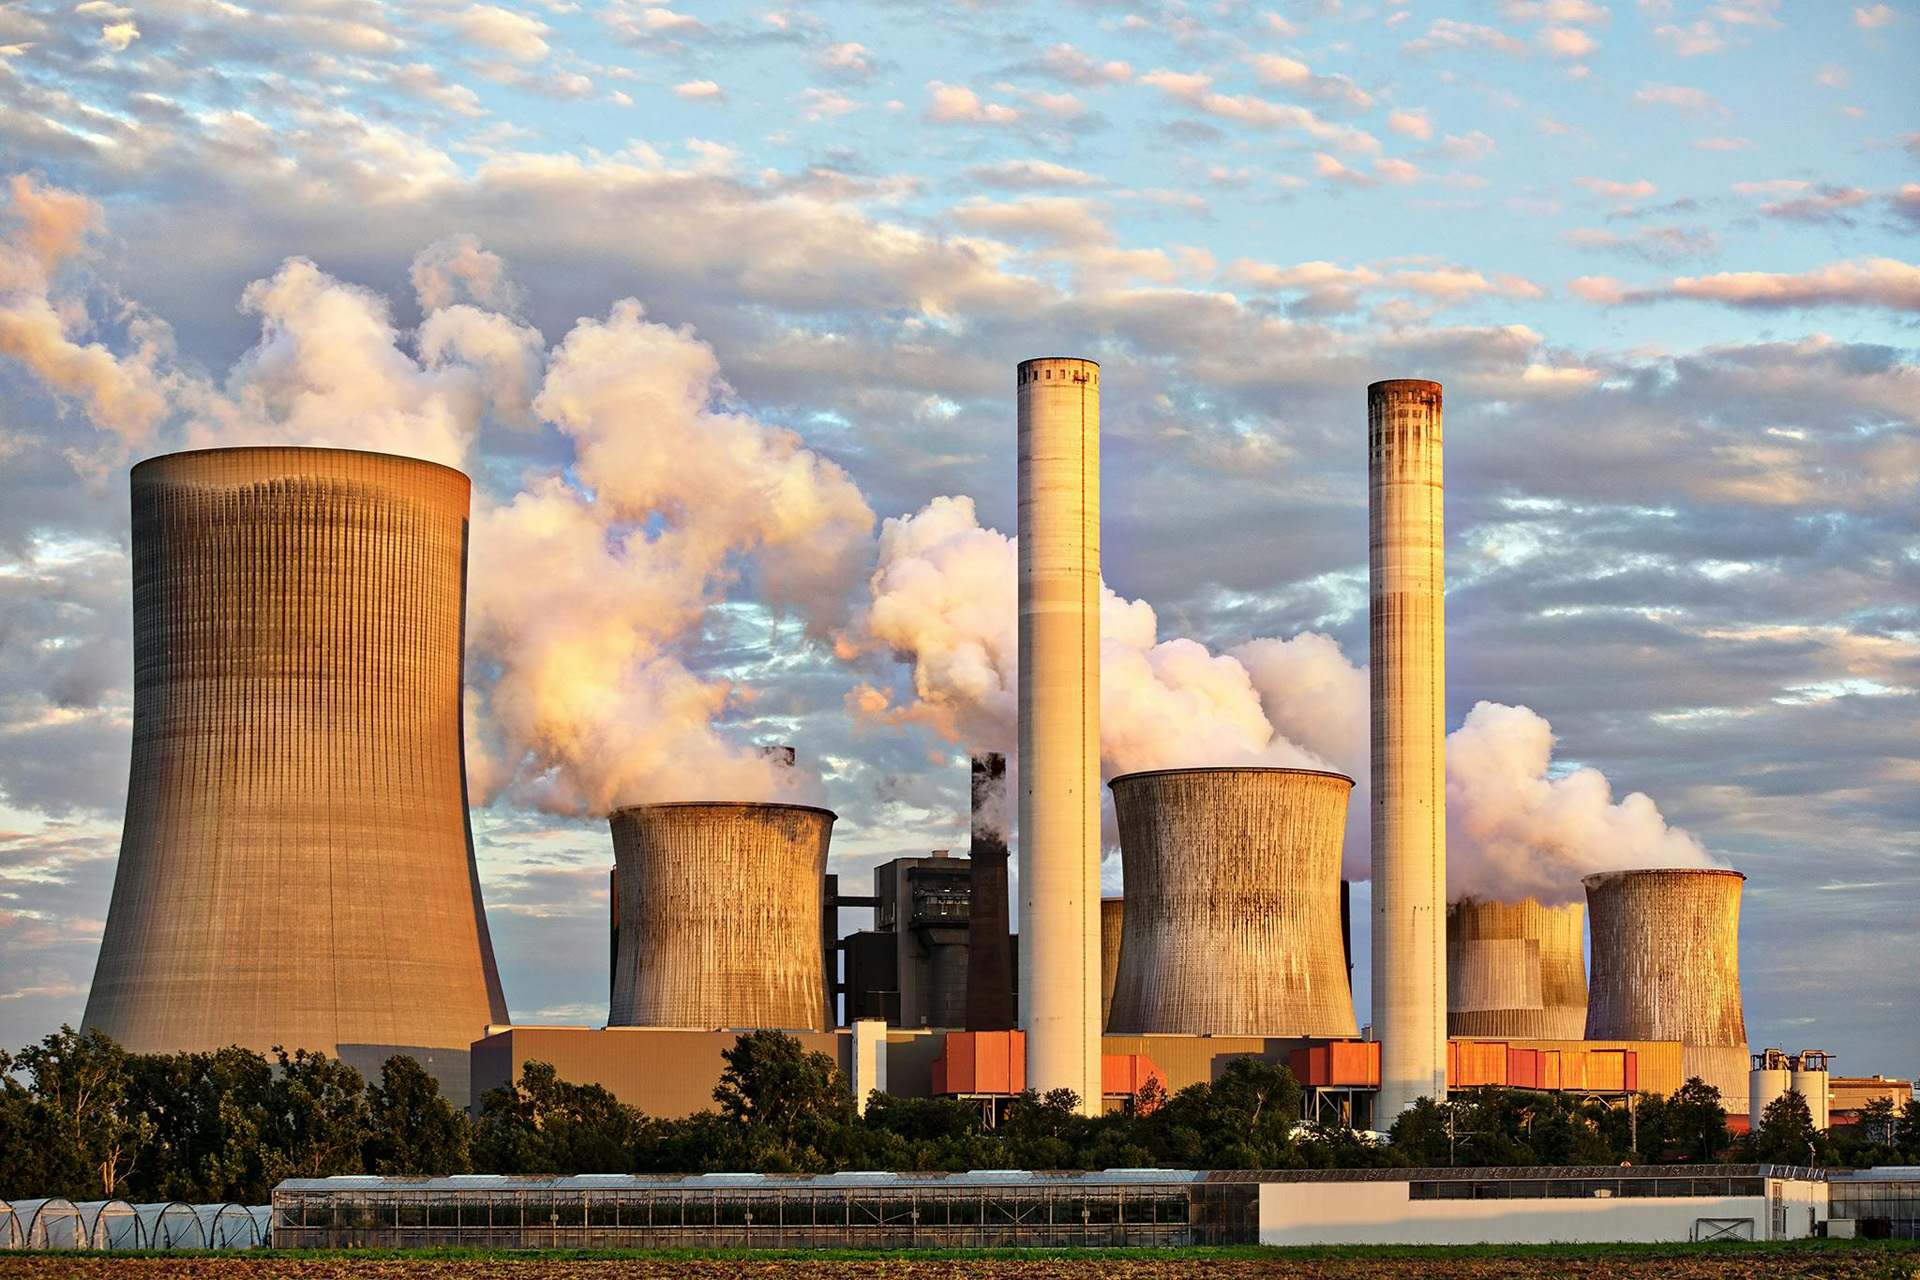 PM To Approve New Gas-Fired Power Stations (& More Climate News You Might Have Missed)